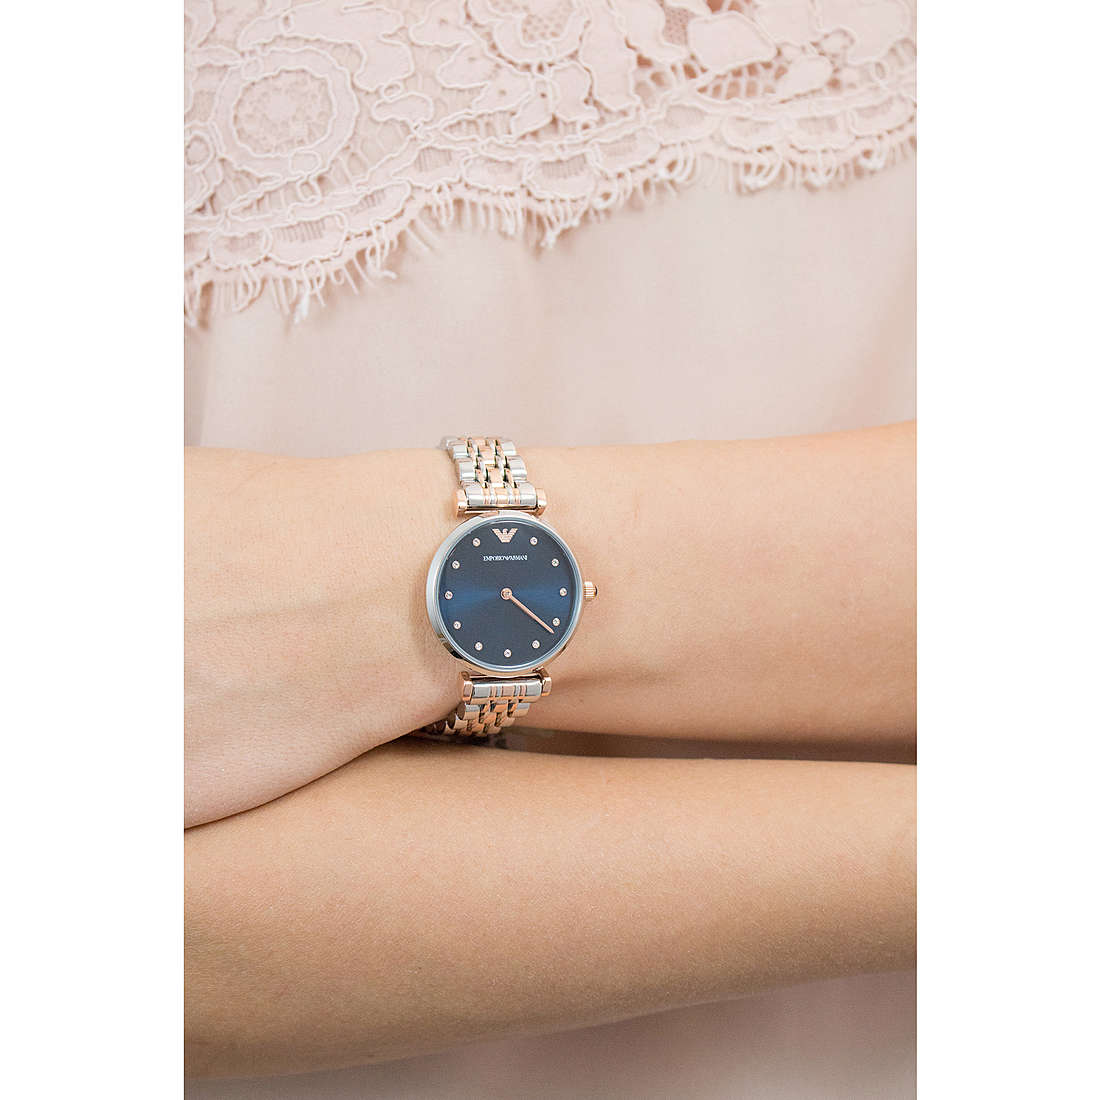 Emporio Armani only time woman AR11092 wearing